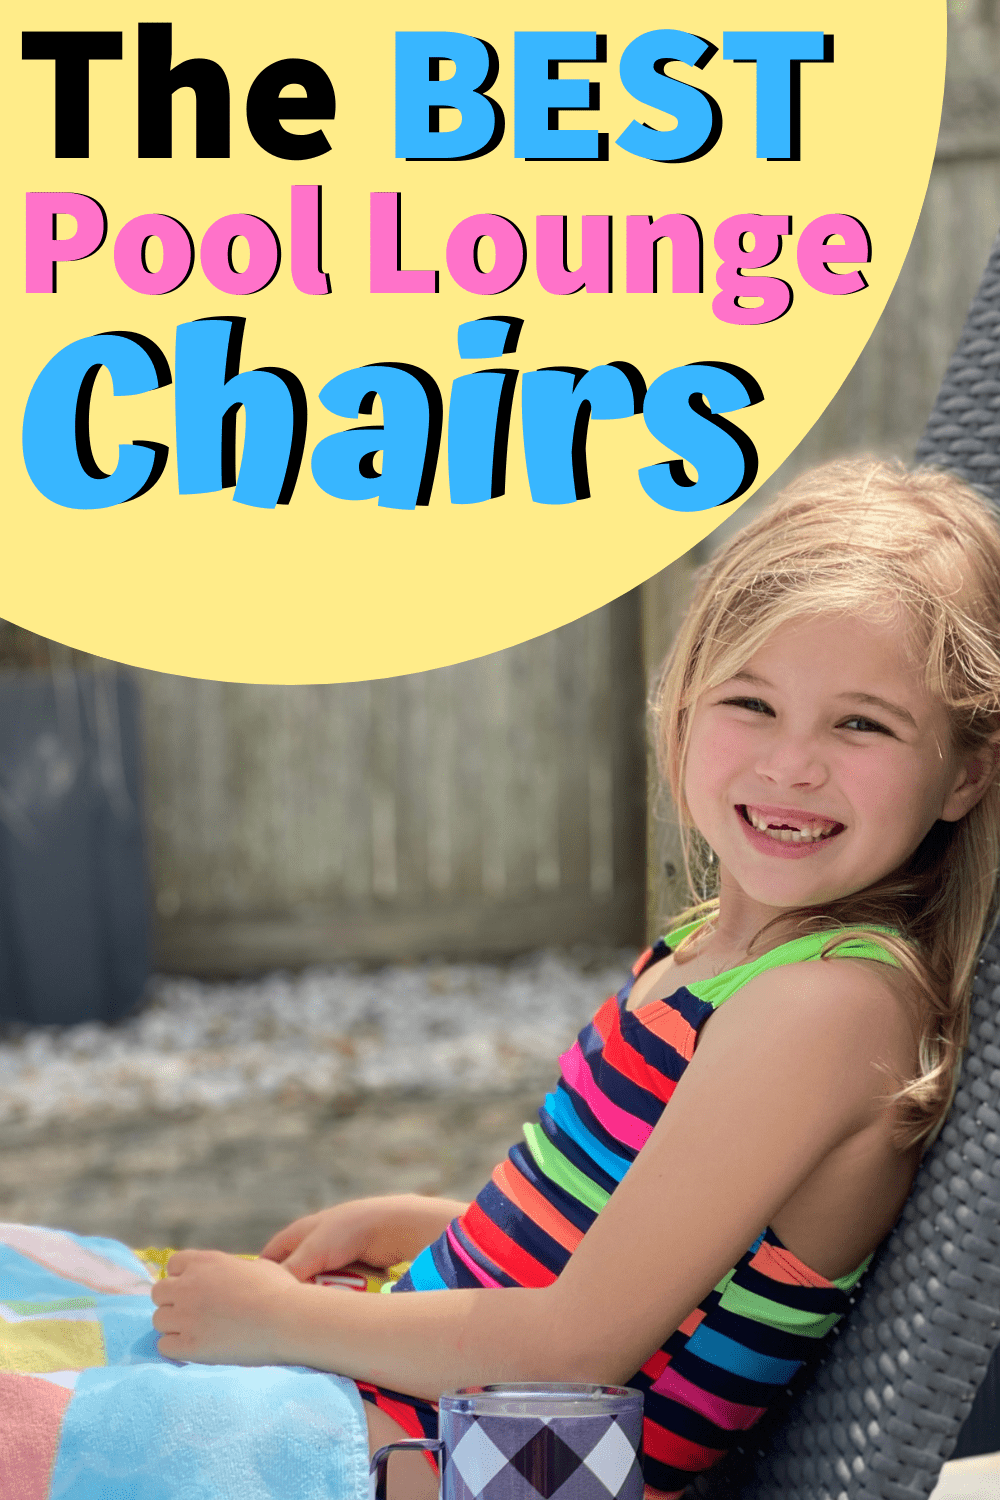 Looking for the best pool lounge chairs? I share my best picks for outdoor pool furniture and accessories for a summer of fun!